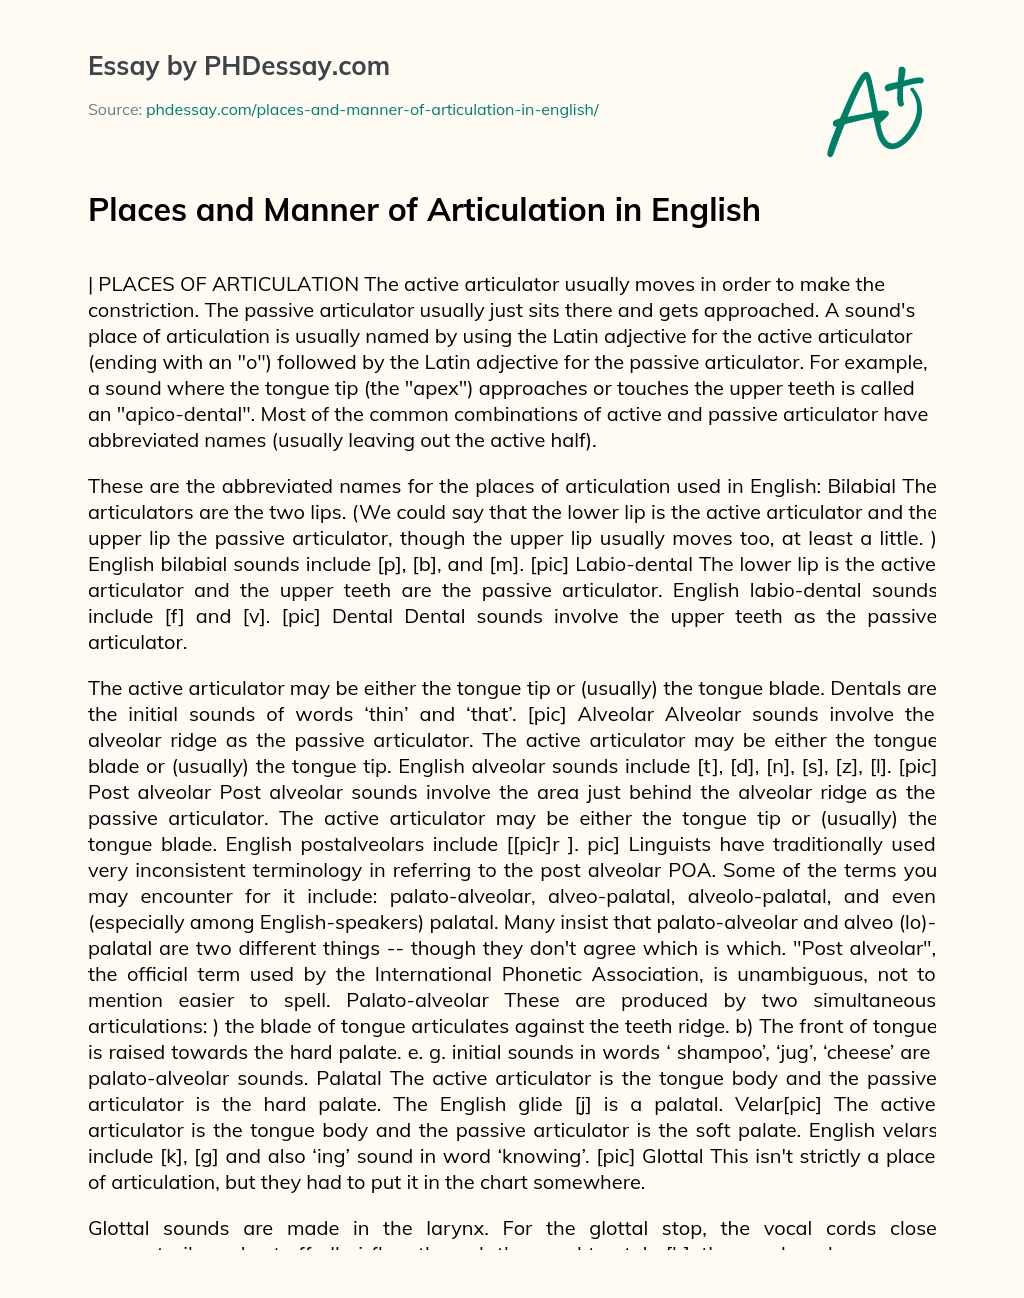 Places and Manner of Articulation in English essay